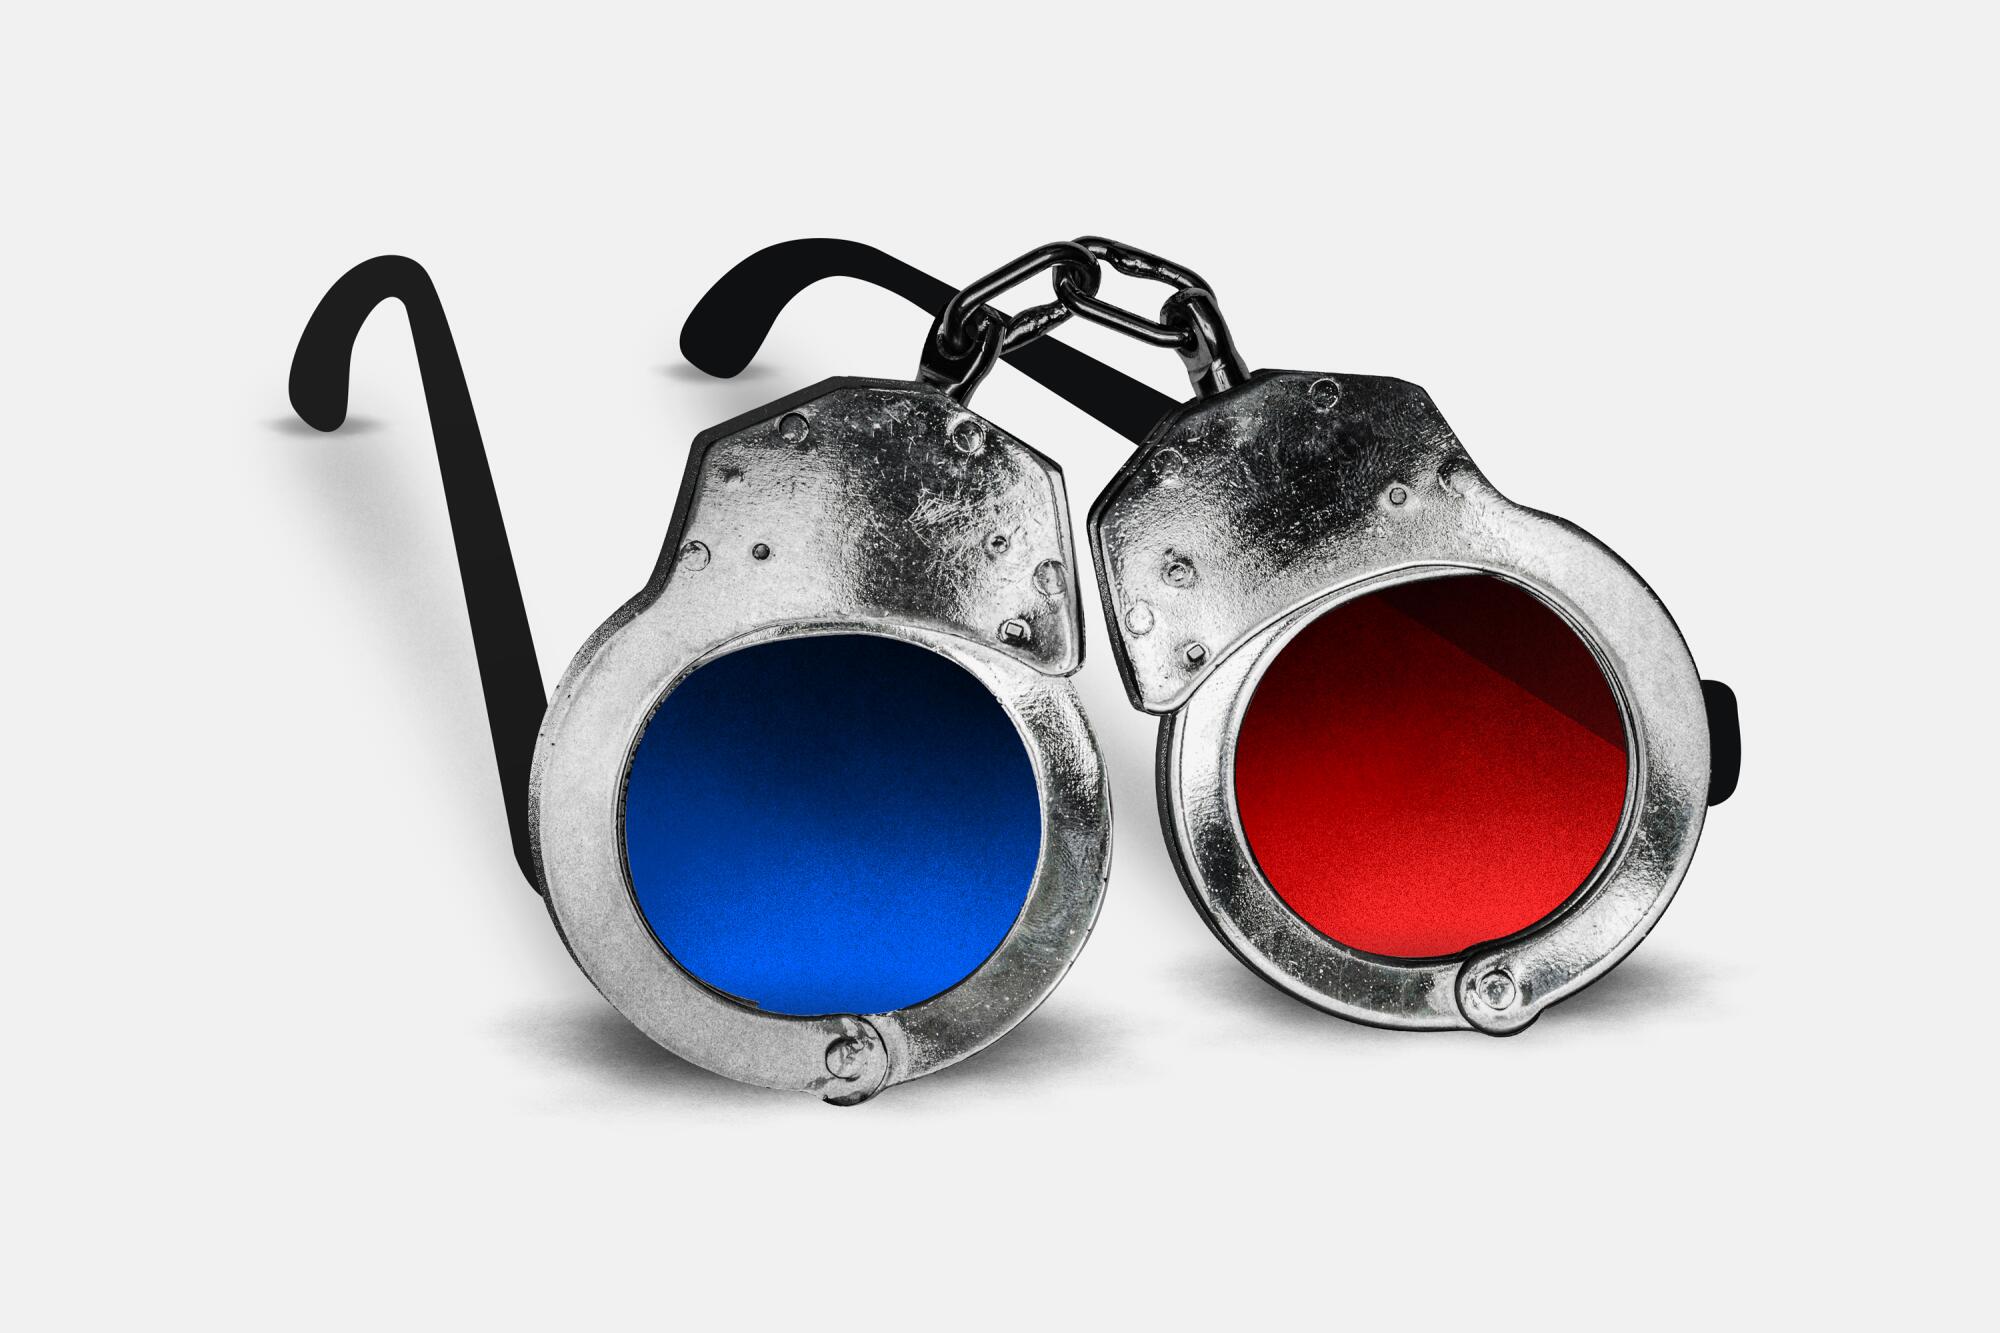 Photo illustration of a pair of glasses formed by handcuffs, one with a red lens and one with a blue lens